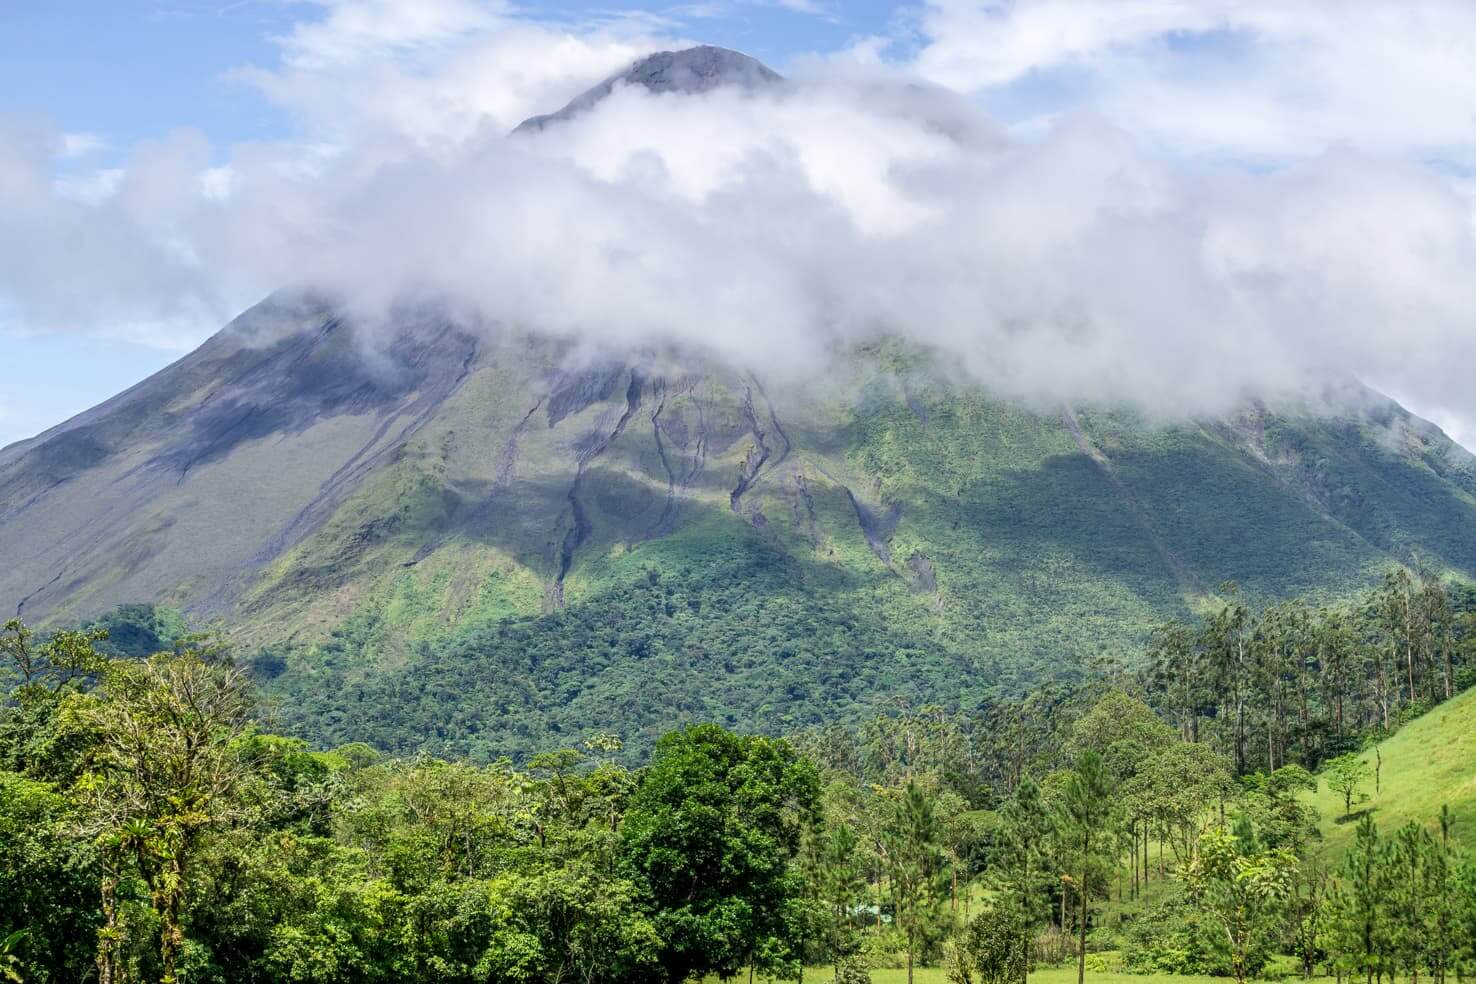 10 days in Costa Rica - Arenal Volcano National Park